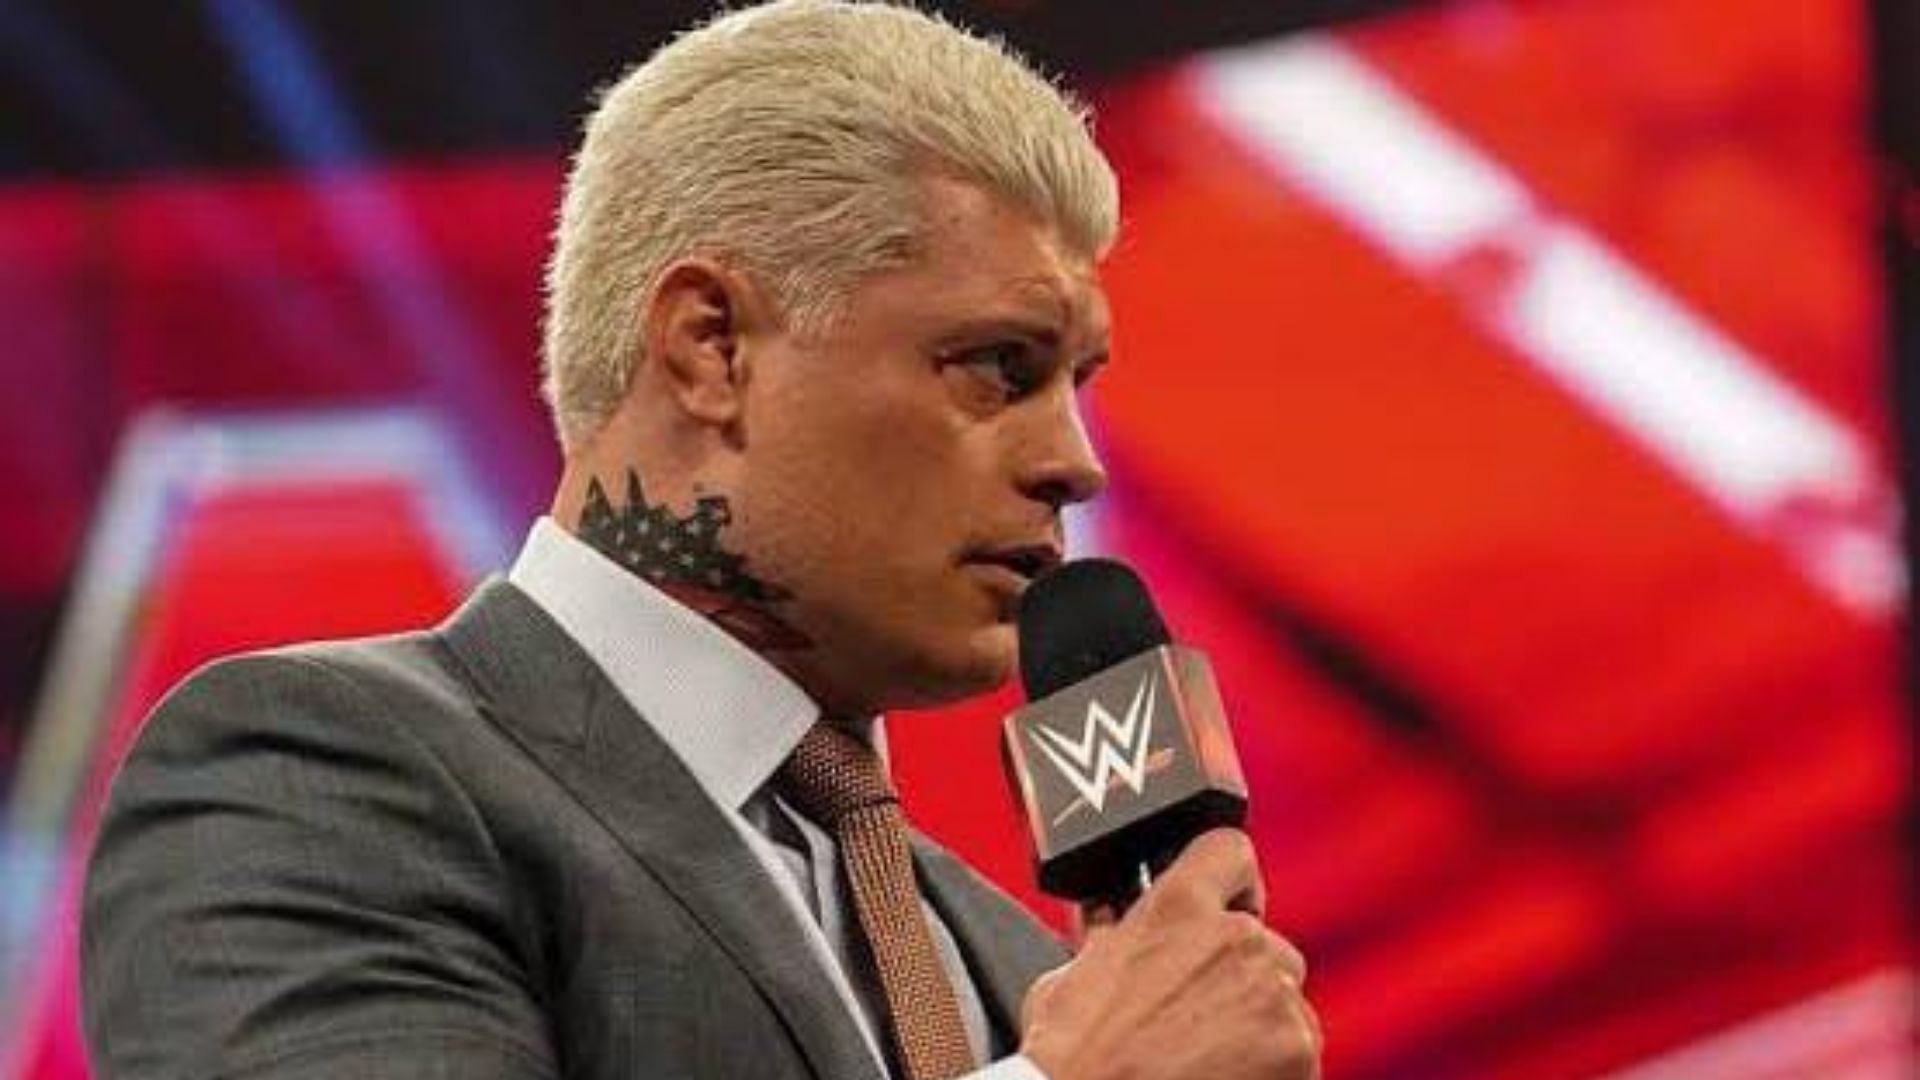 Cody Rhodes is currently a WWE superstar